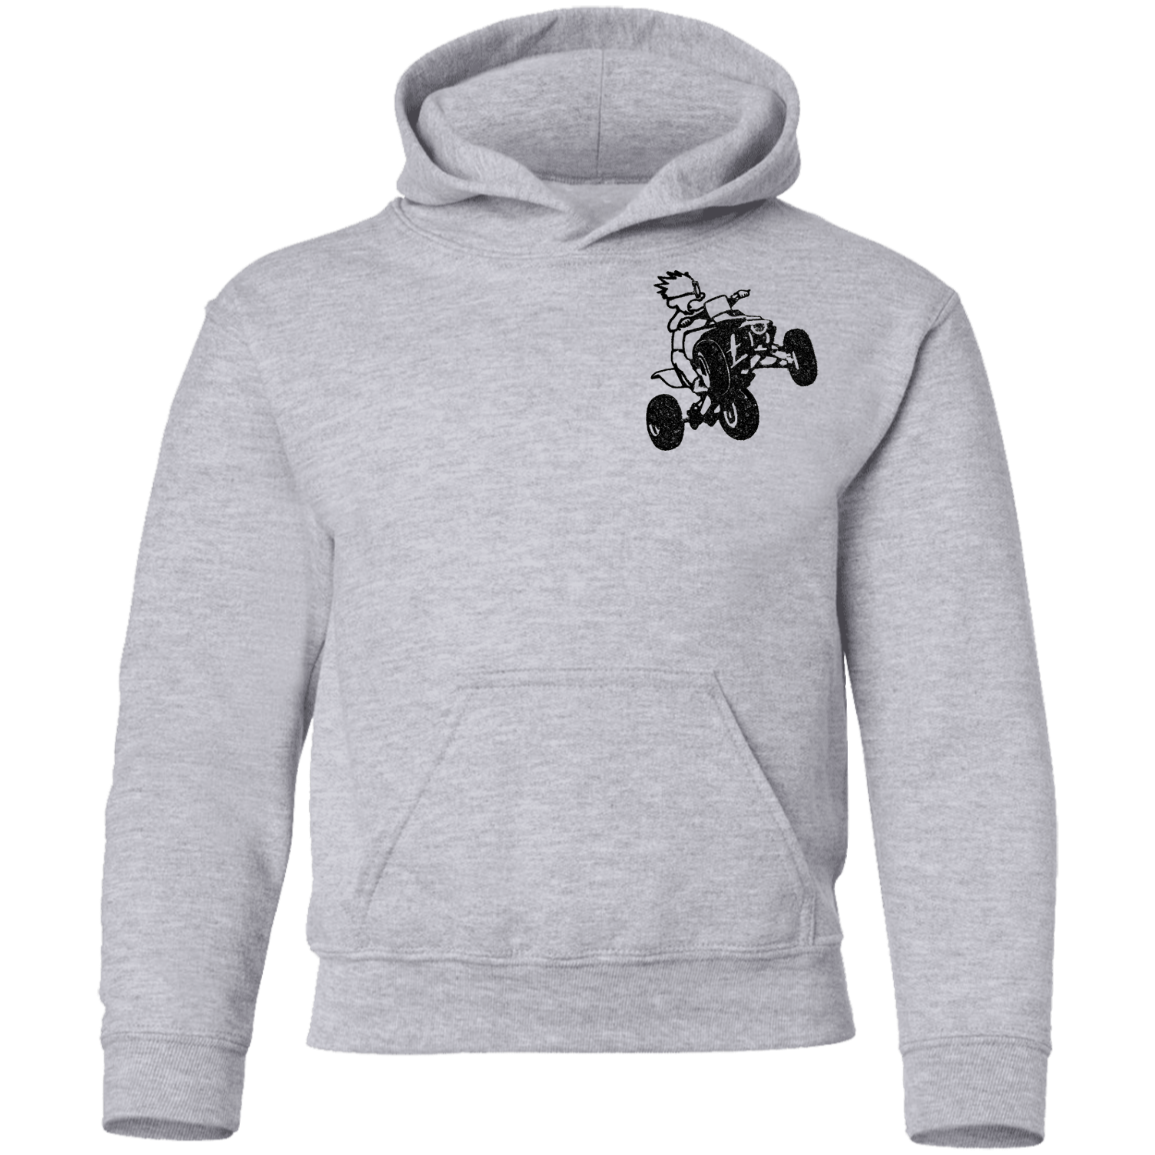 Youth 4-wheeler extreme pullover Hoodie front and back print